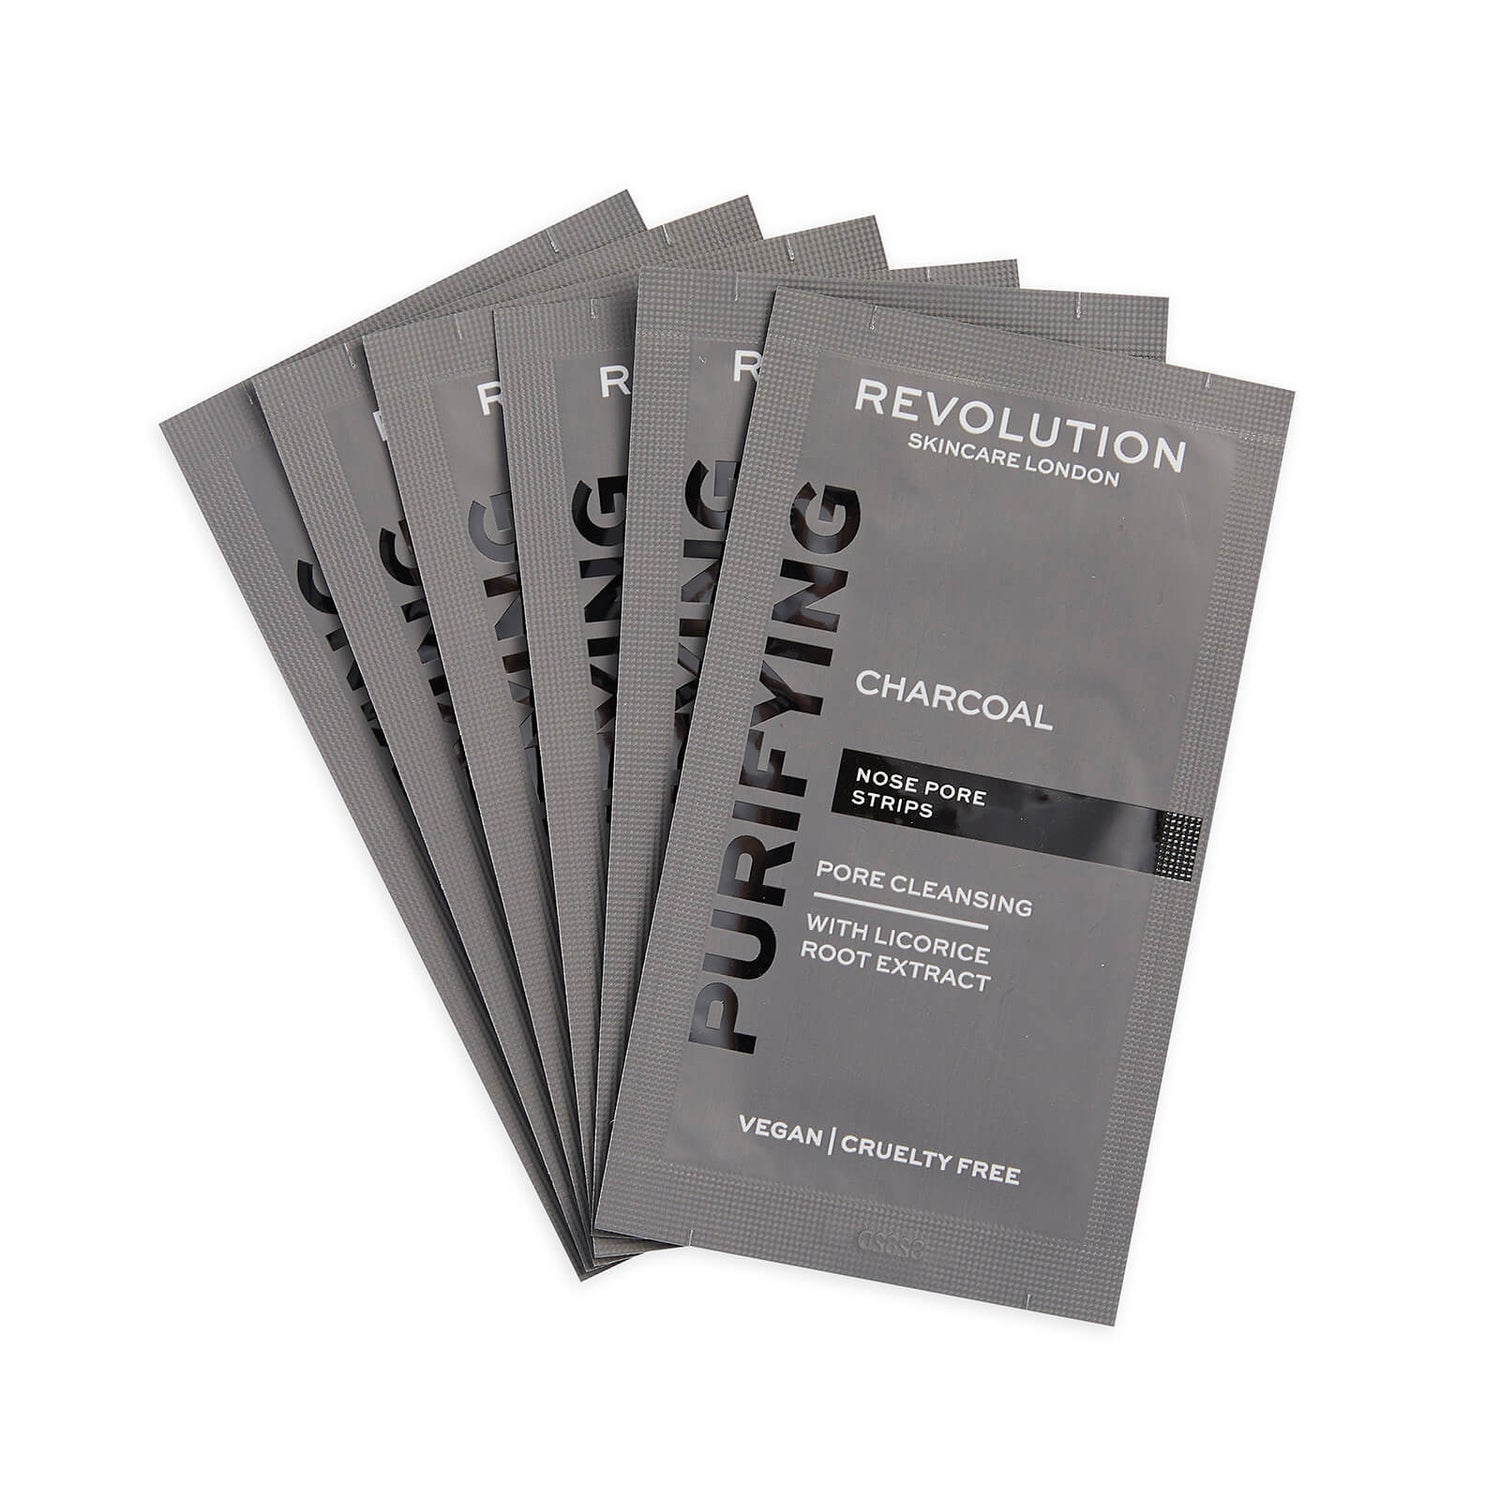 Skincare Pore Cleansing Charcoal Nose Strips Revolution 6g